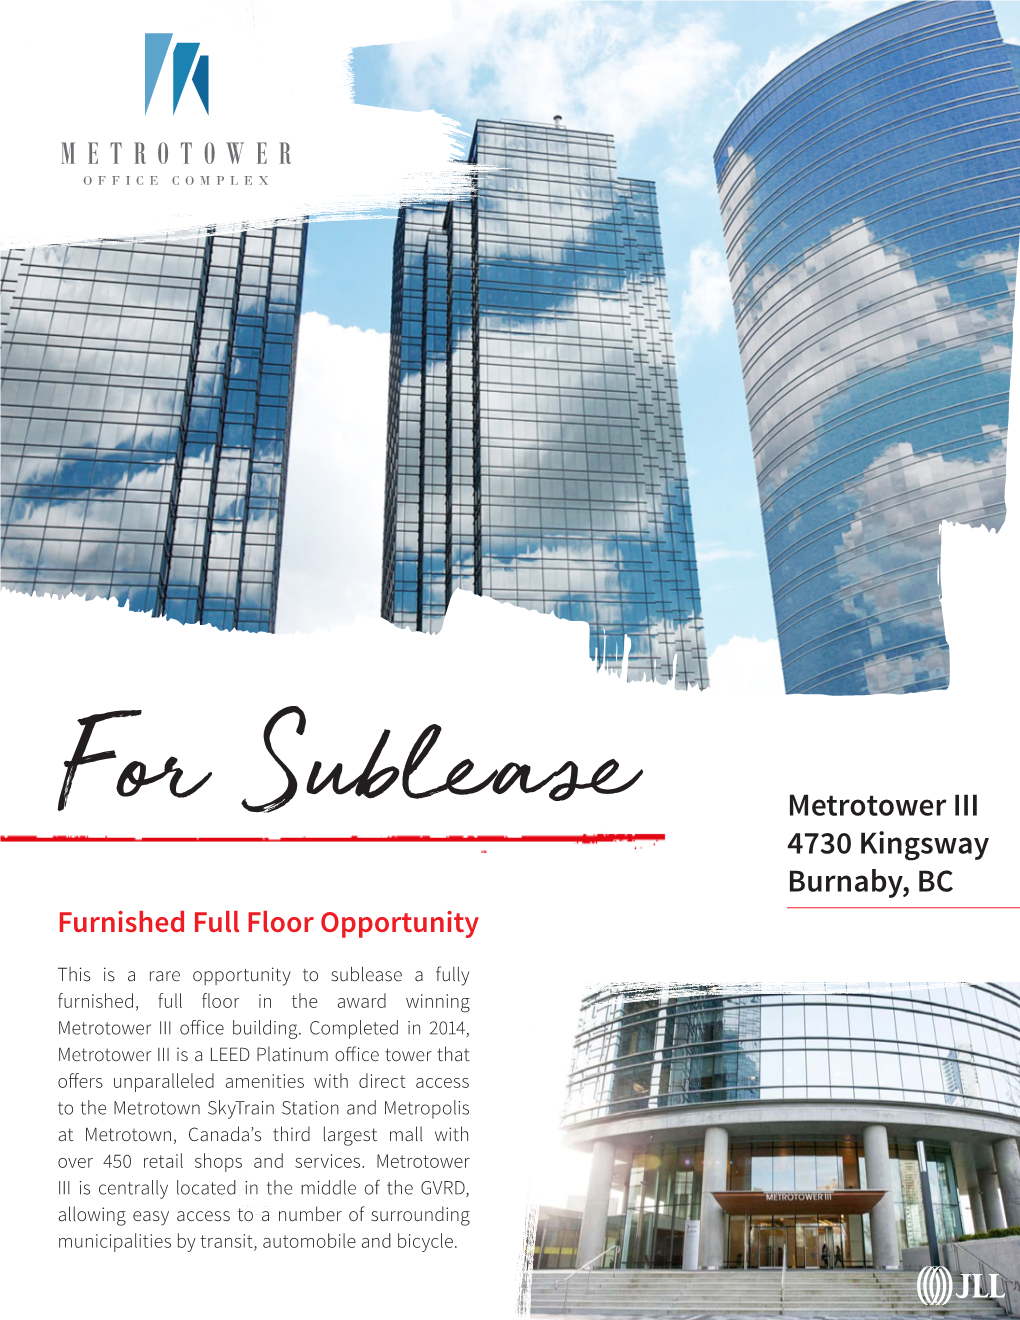 For Sublease Metrotower III 4730 Kingsway Burnaby, BC Furnished Full Floor Opportunity